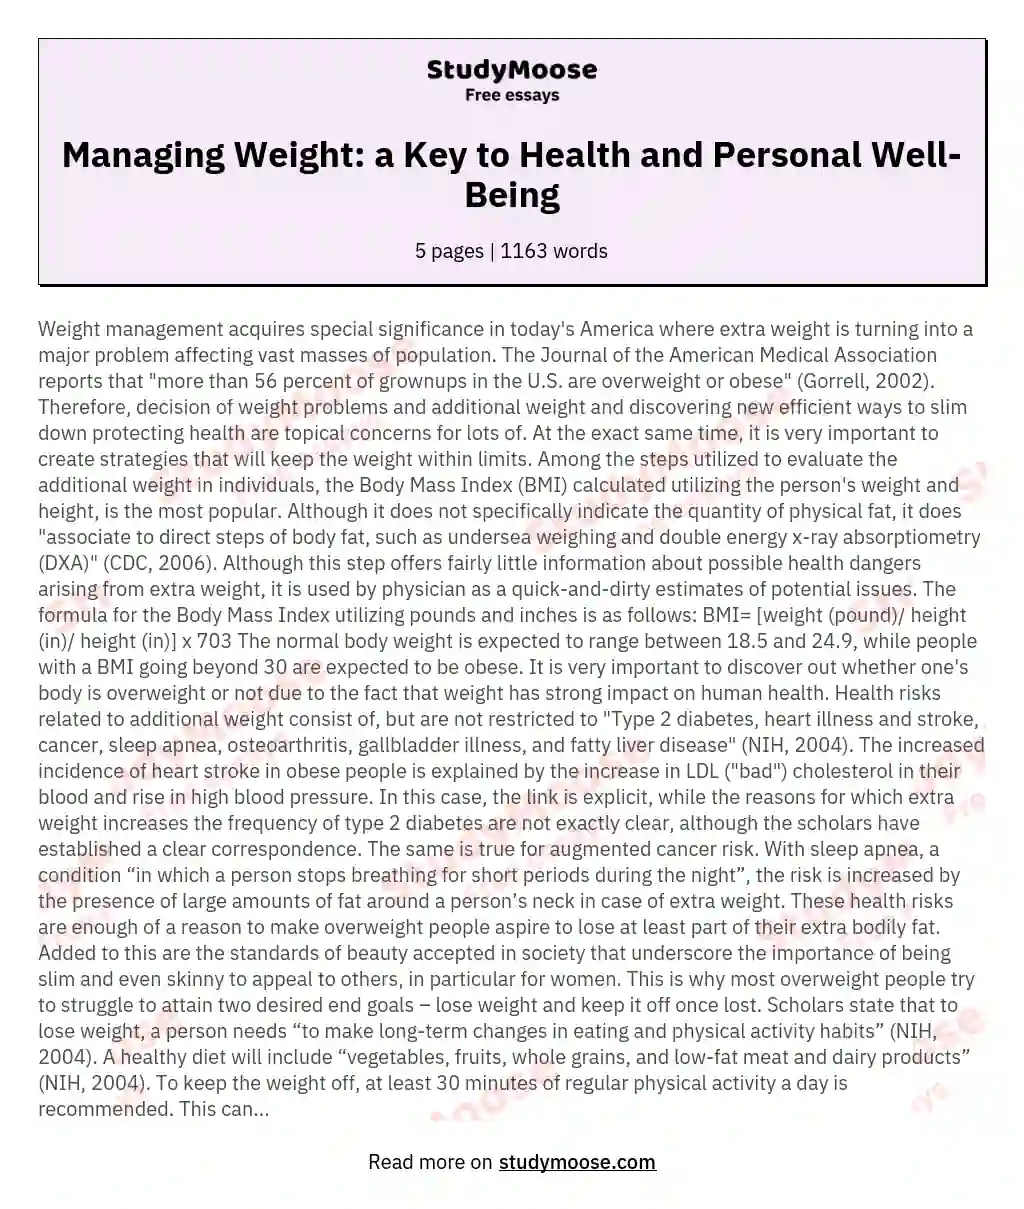 Managing Weight: a Key to Health and Personal Well-Being essay